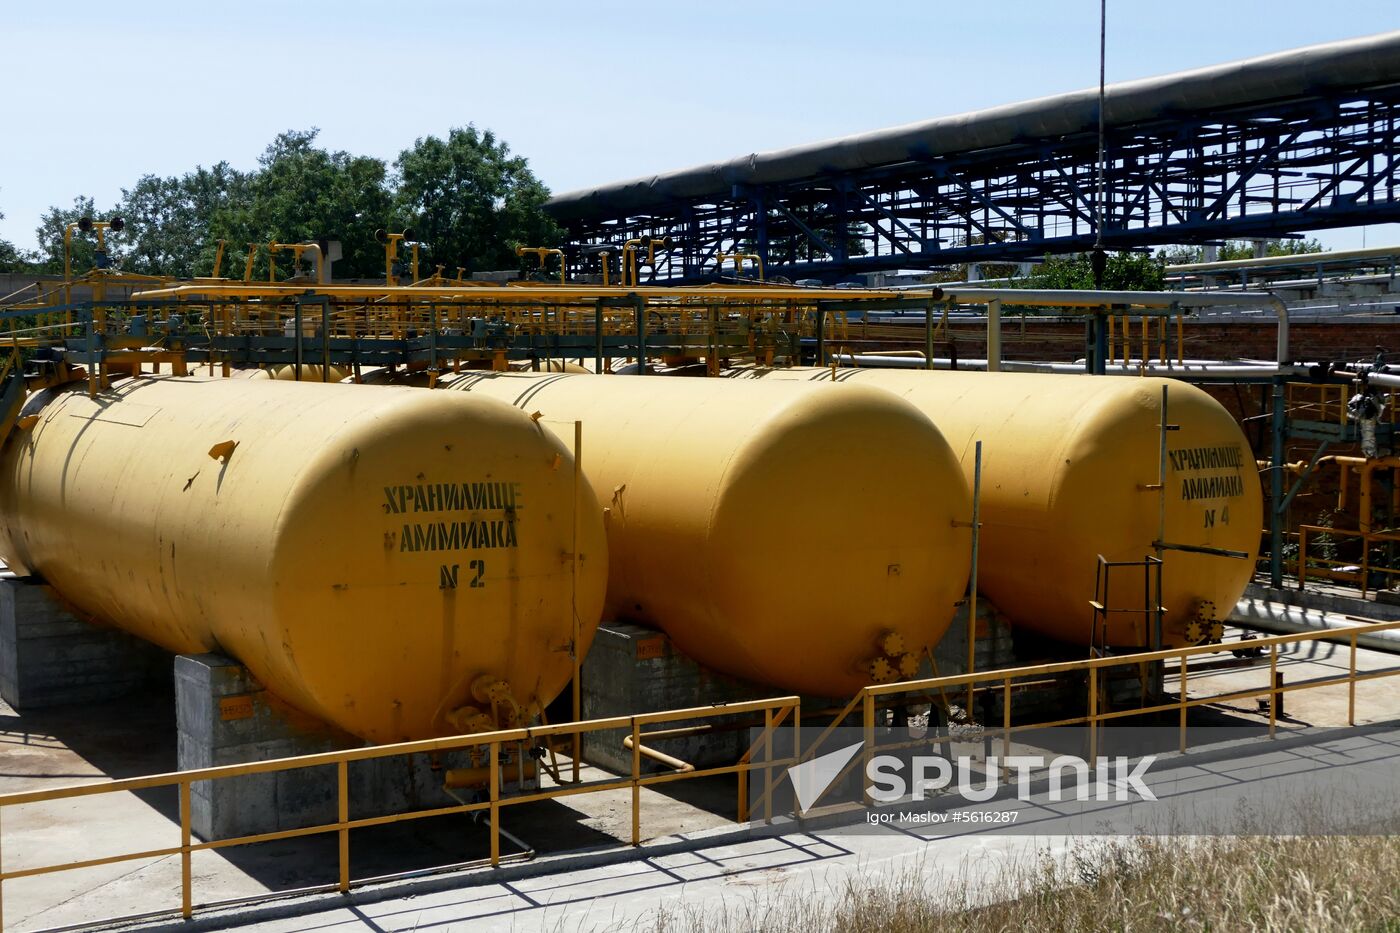 Preparing to launch Stirol chemical plant in DPR